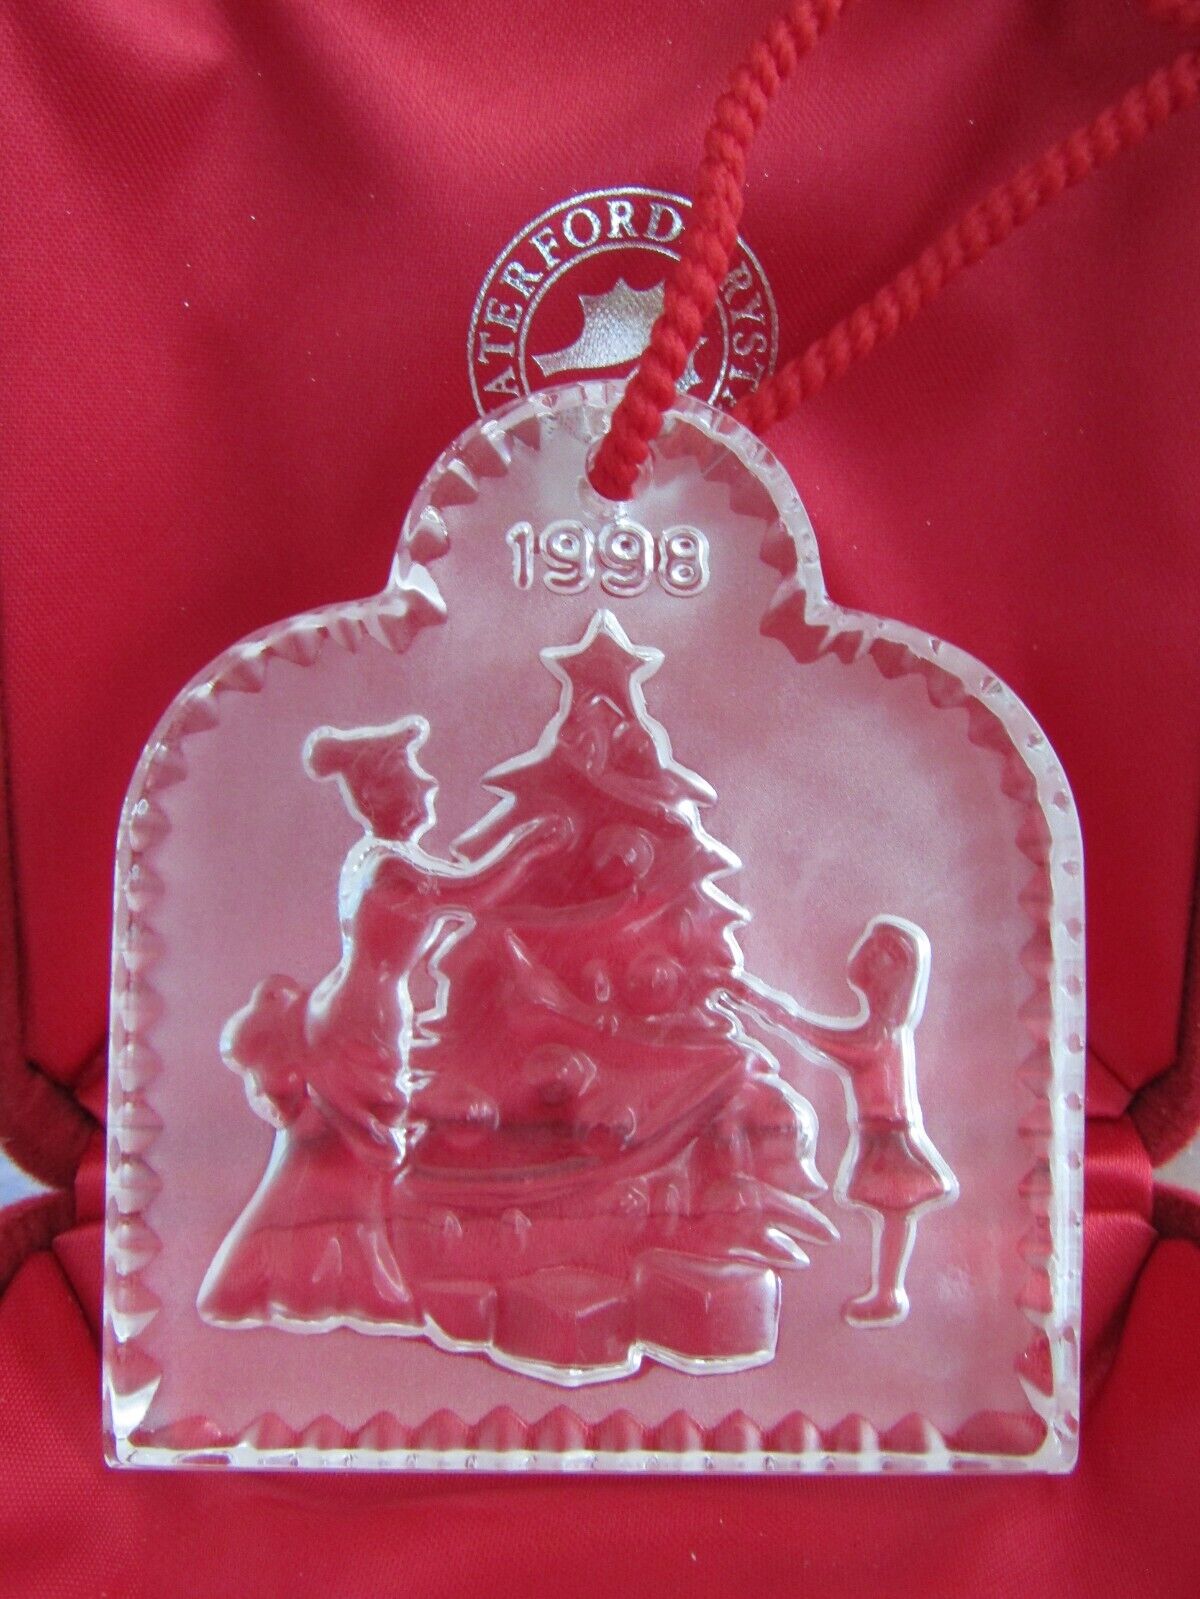 Waterford Crystal Trimming the Tree 1998 Ornament w/ Original Bag & Velvet Case